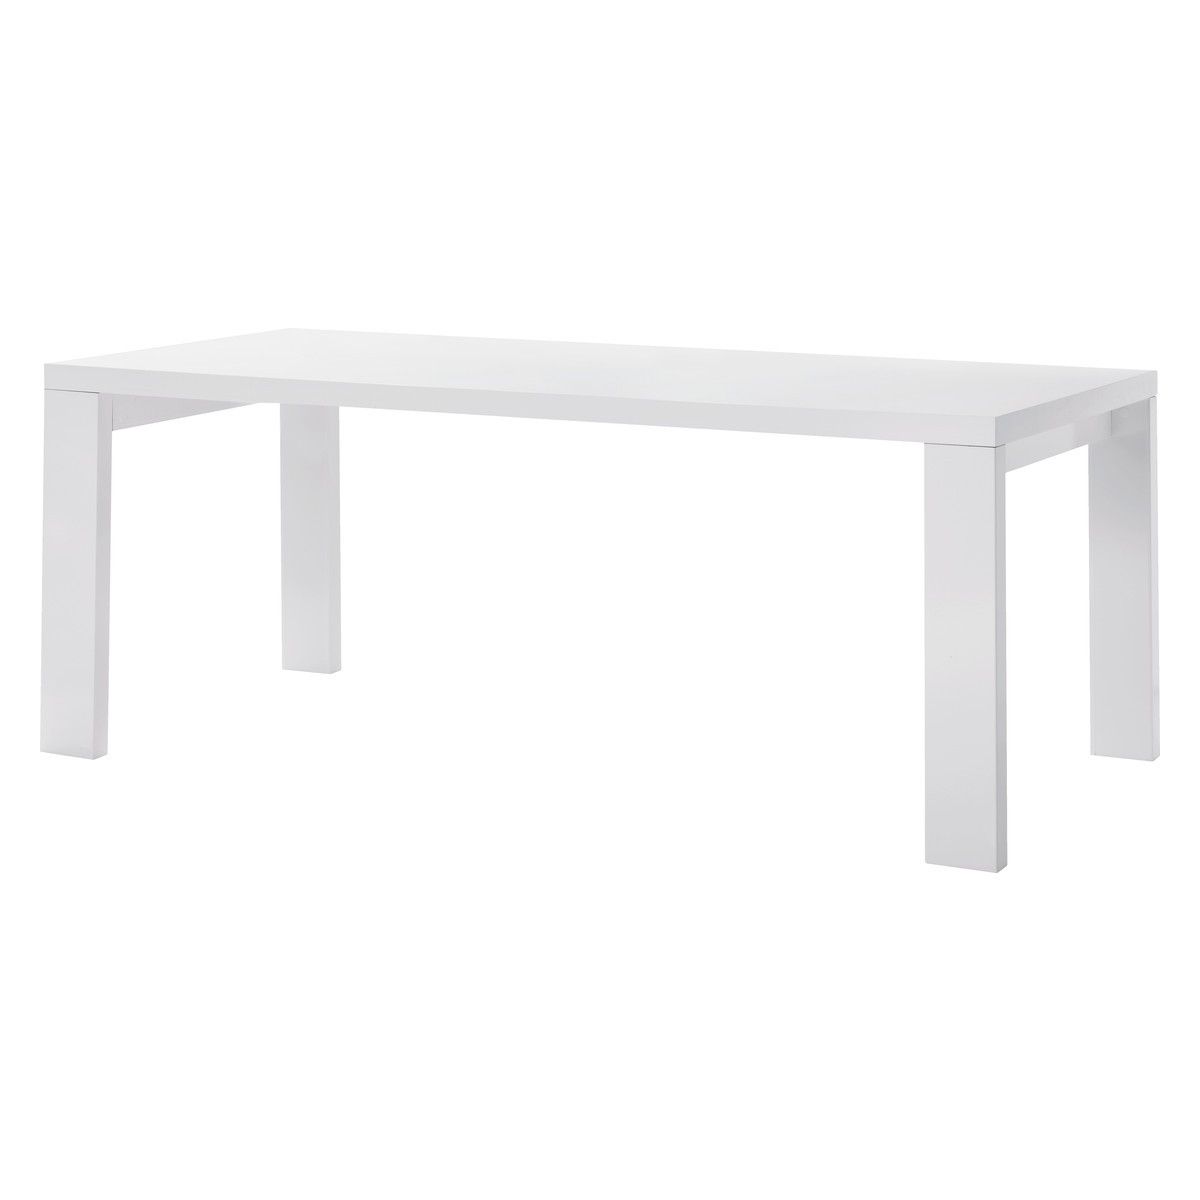 White Dining Tables 8 Seater Pertaining To 2018 Asper 8 Seater White High Gloss Dining Table (View 5 of 25)